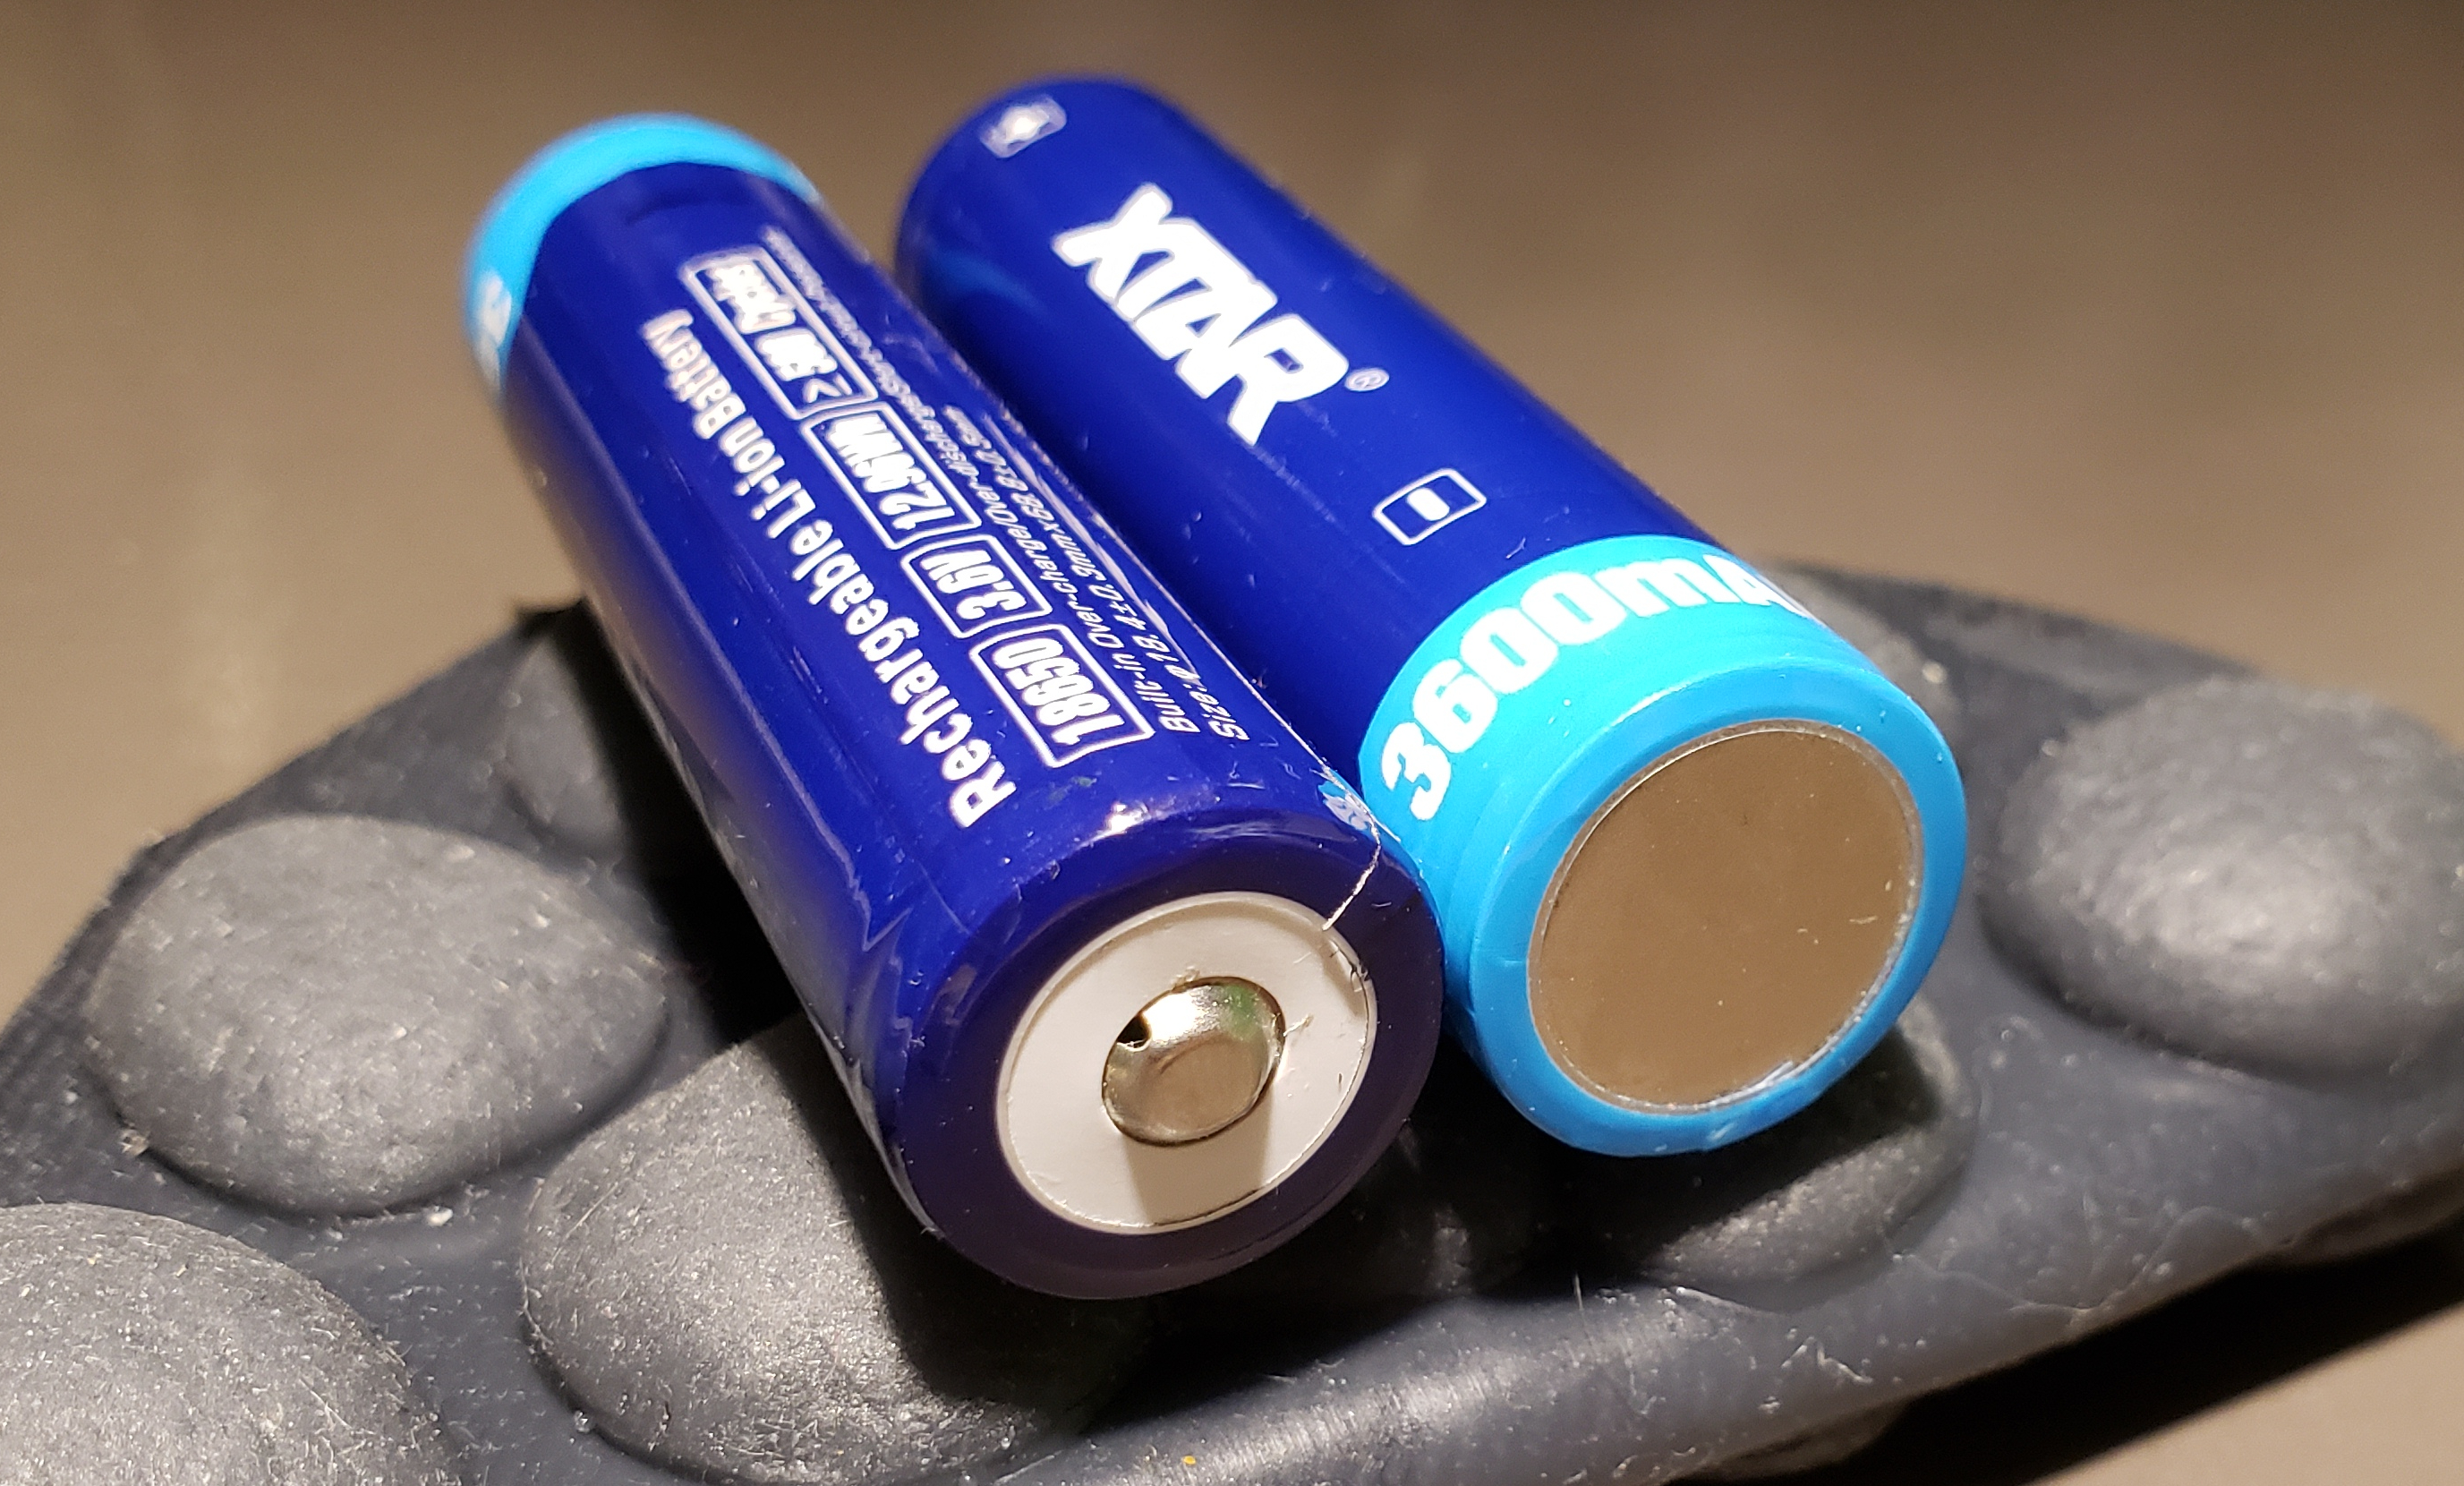 Positive and negative terminals of the XTAR 3600mAh protected 18650 battery.